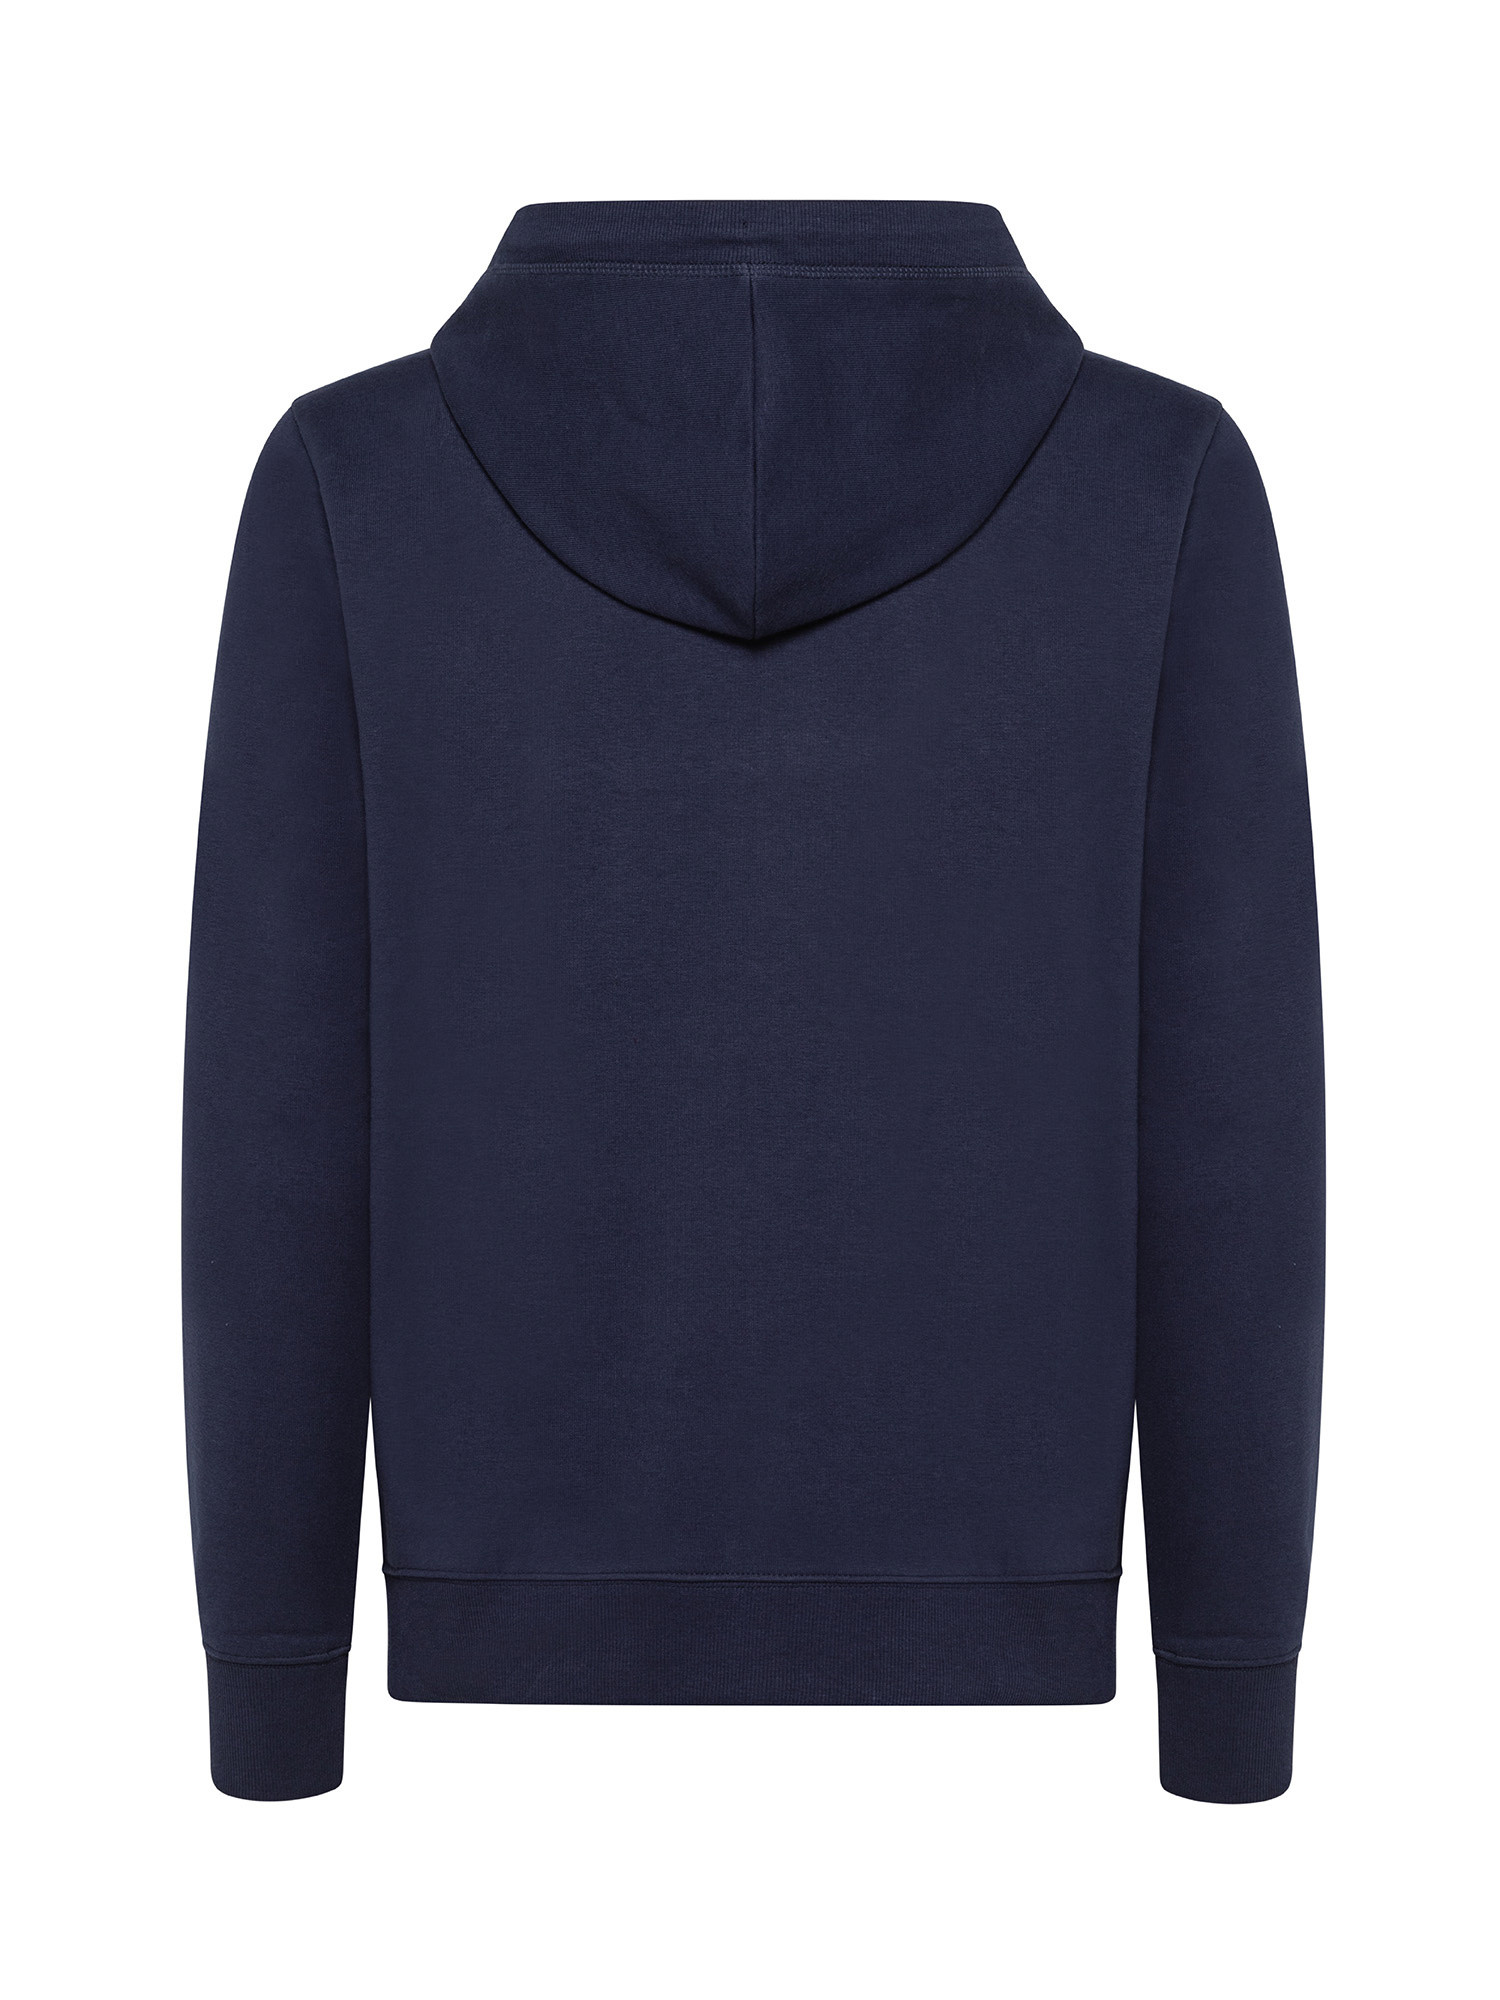 JCT - Felpa con cappuccio full zip soft touch, Blu, large image number 1